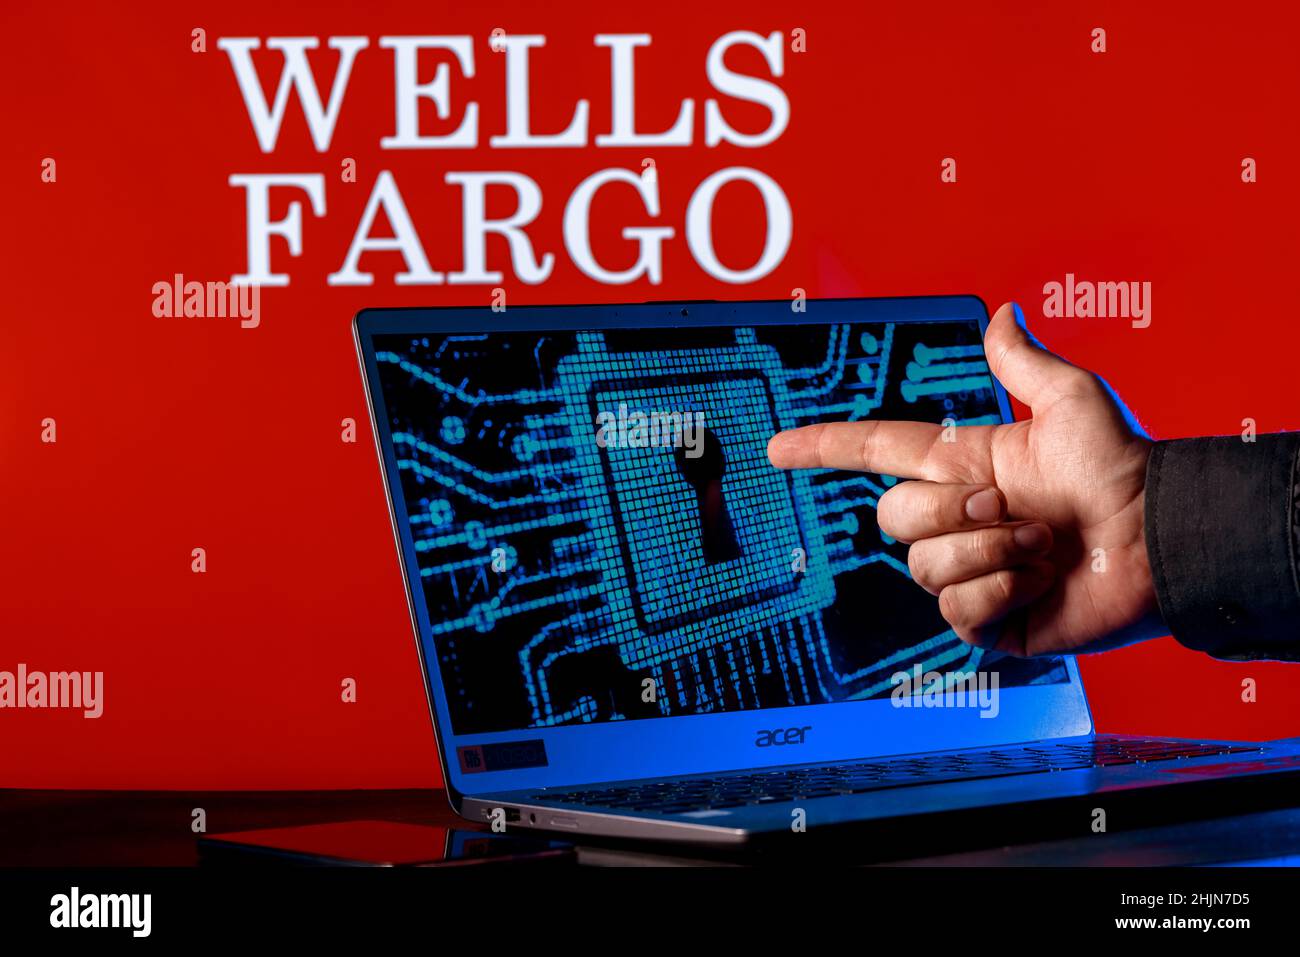 Laptop with lock symbol on screen on background of  Wells Fargo bank logo. Finger points to lock symbol. Concept of data hacking. Stock Photo